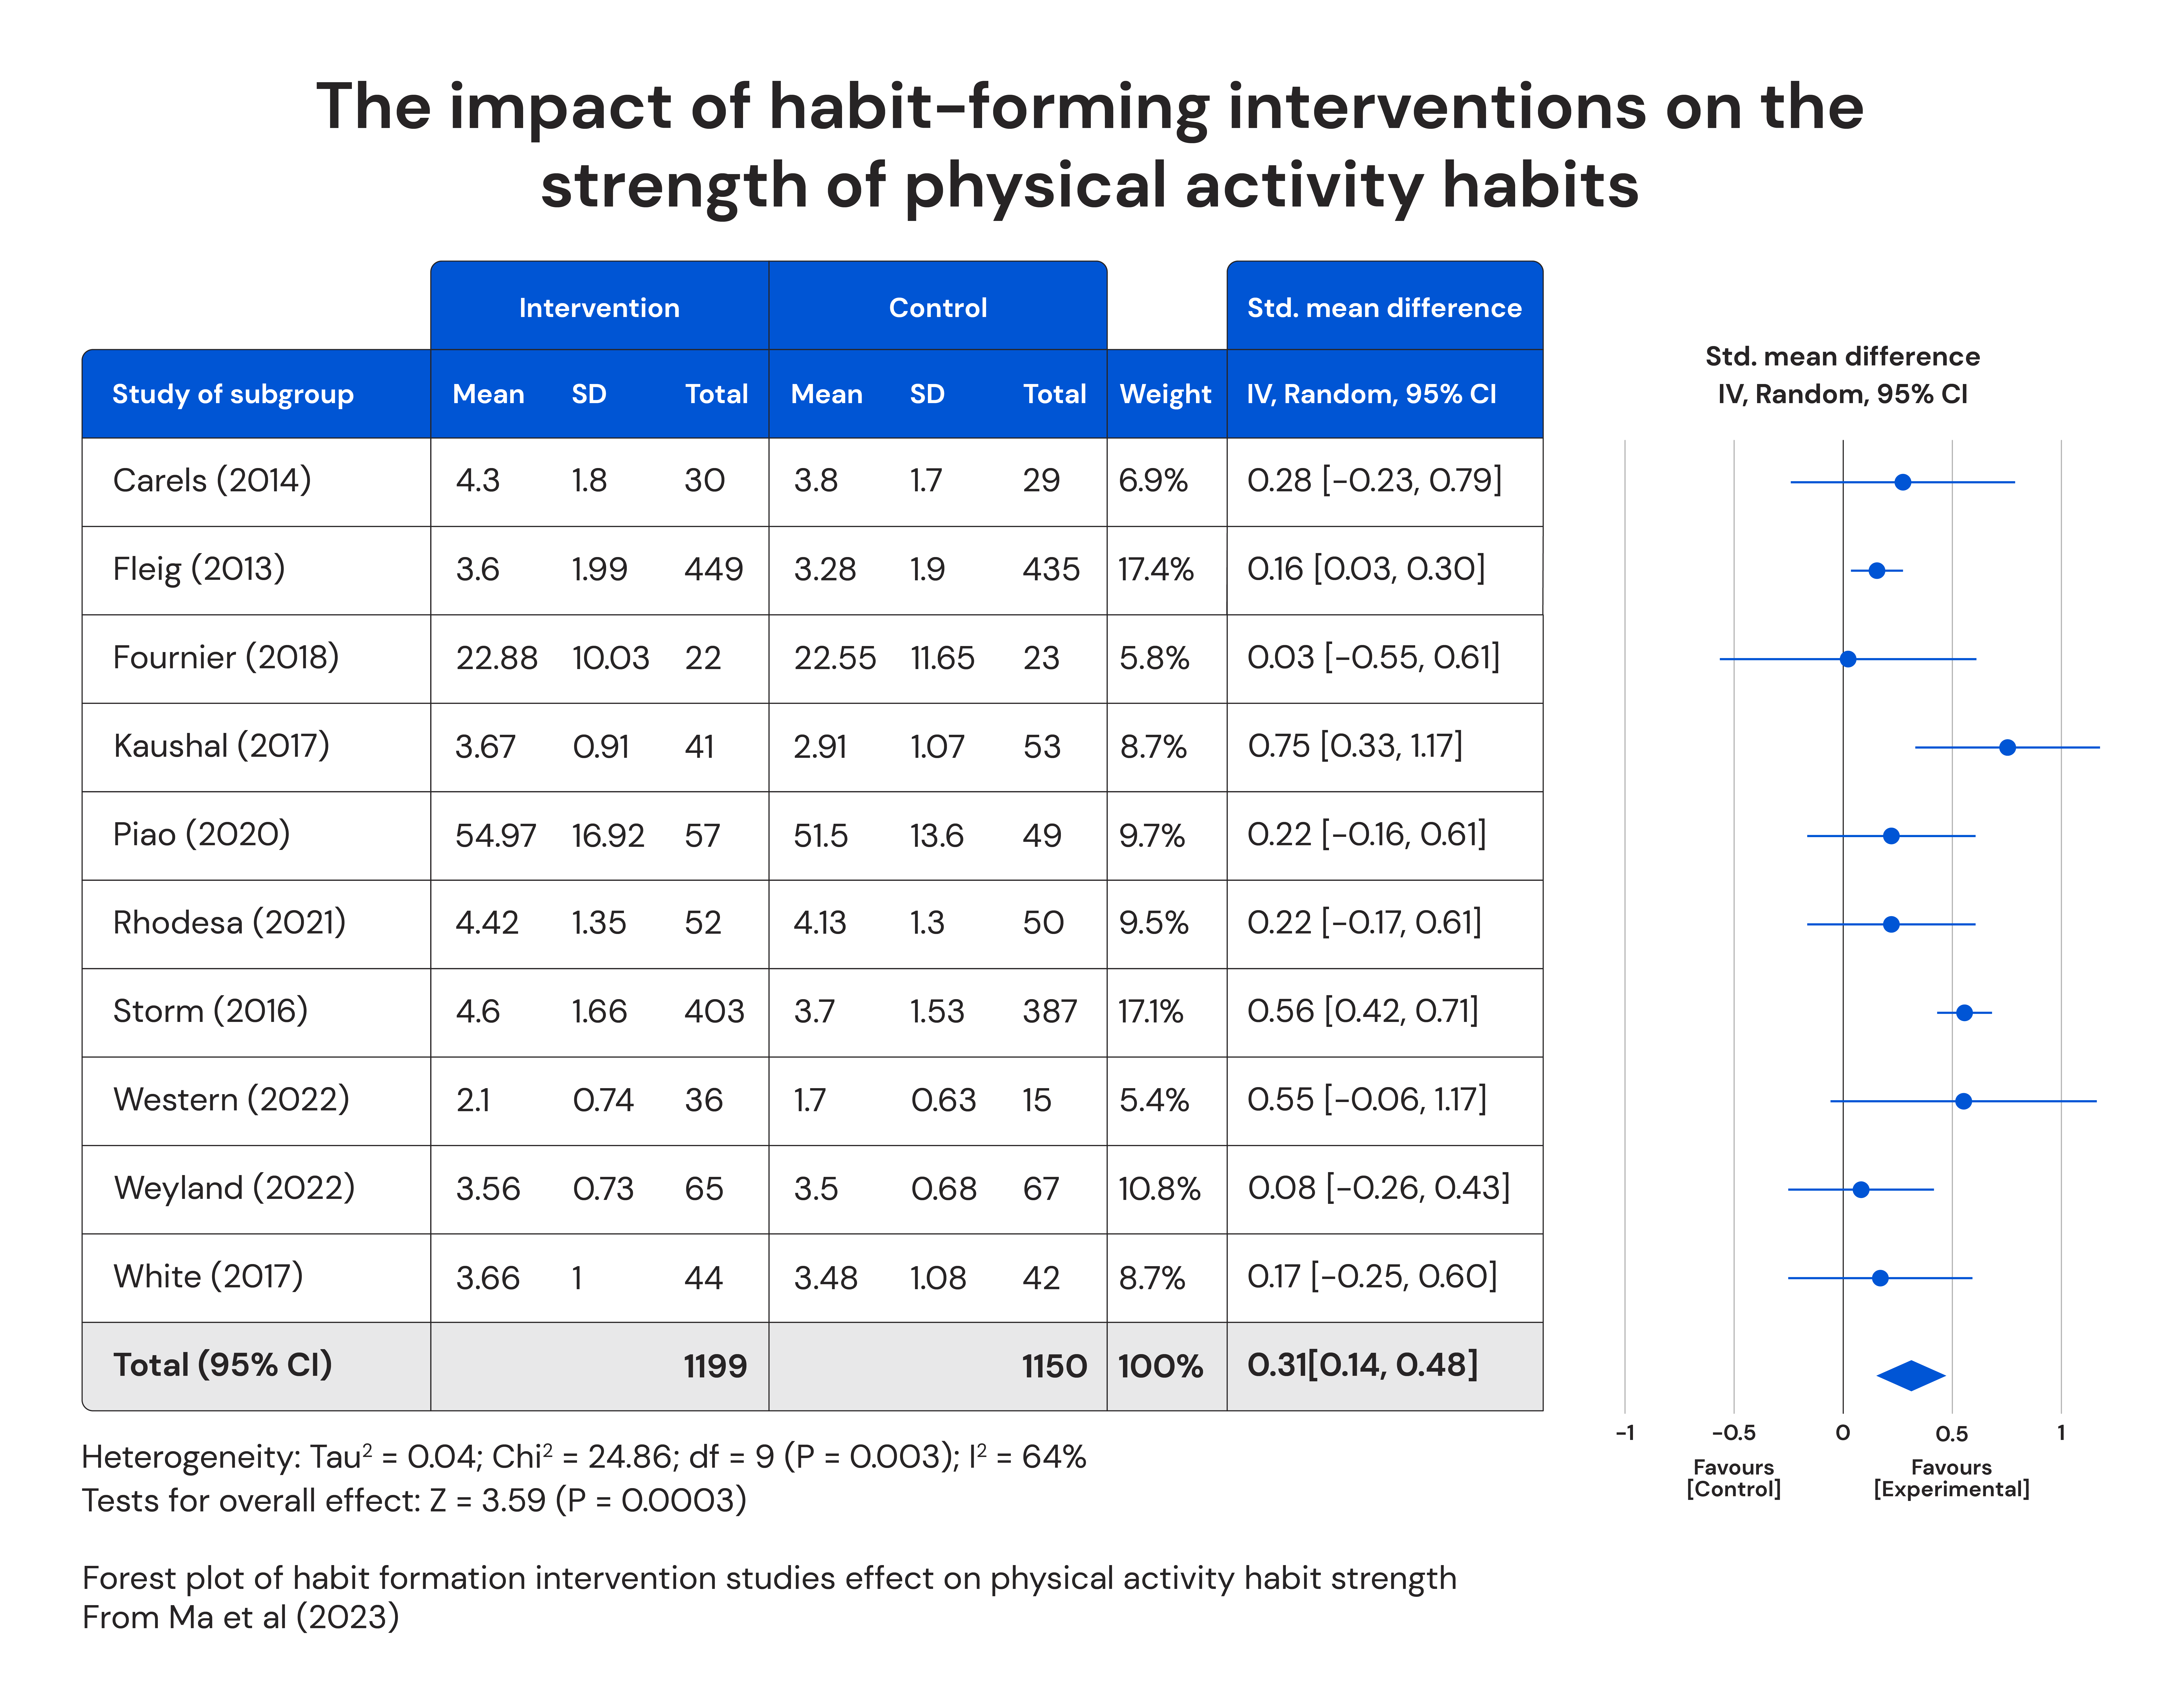 The impact of habit-forming interventions on the strength of physical activity habits